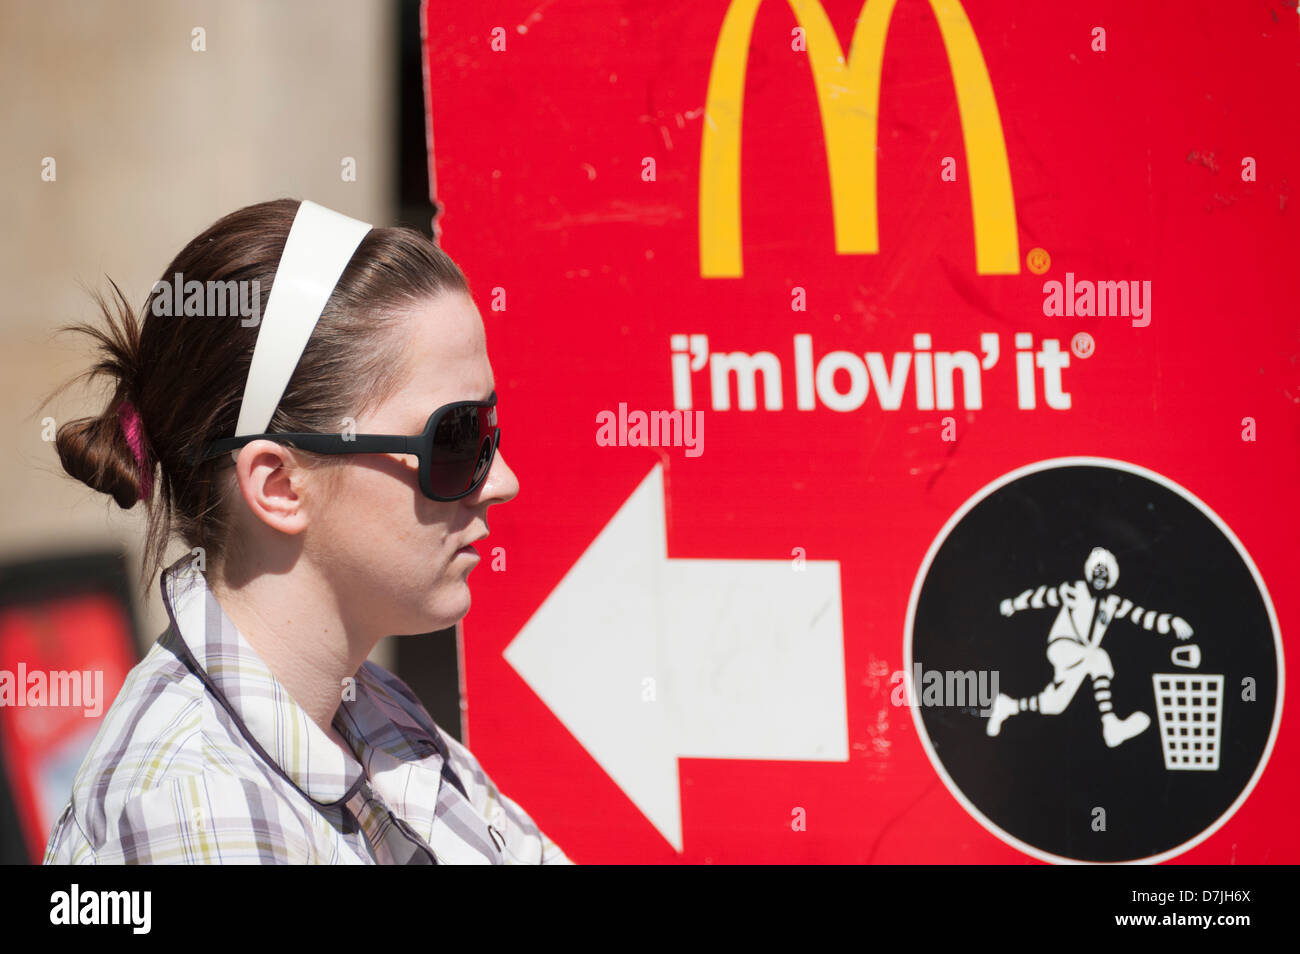 A young woman holding a McDonald's restaurant adverting placard Stock Photo